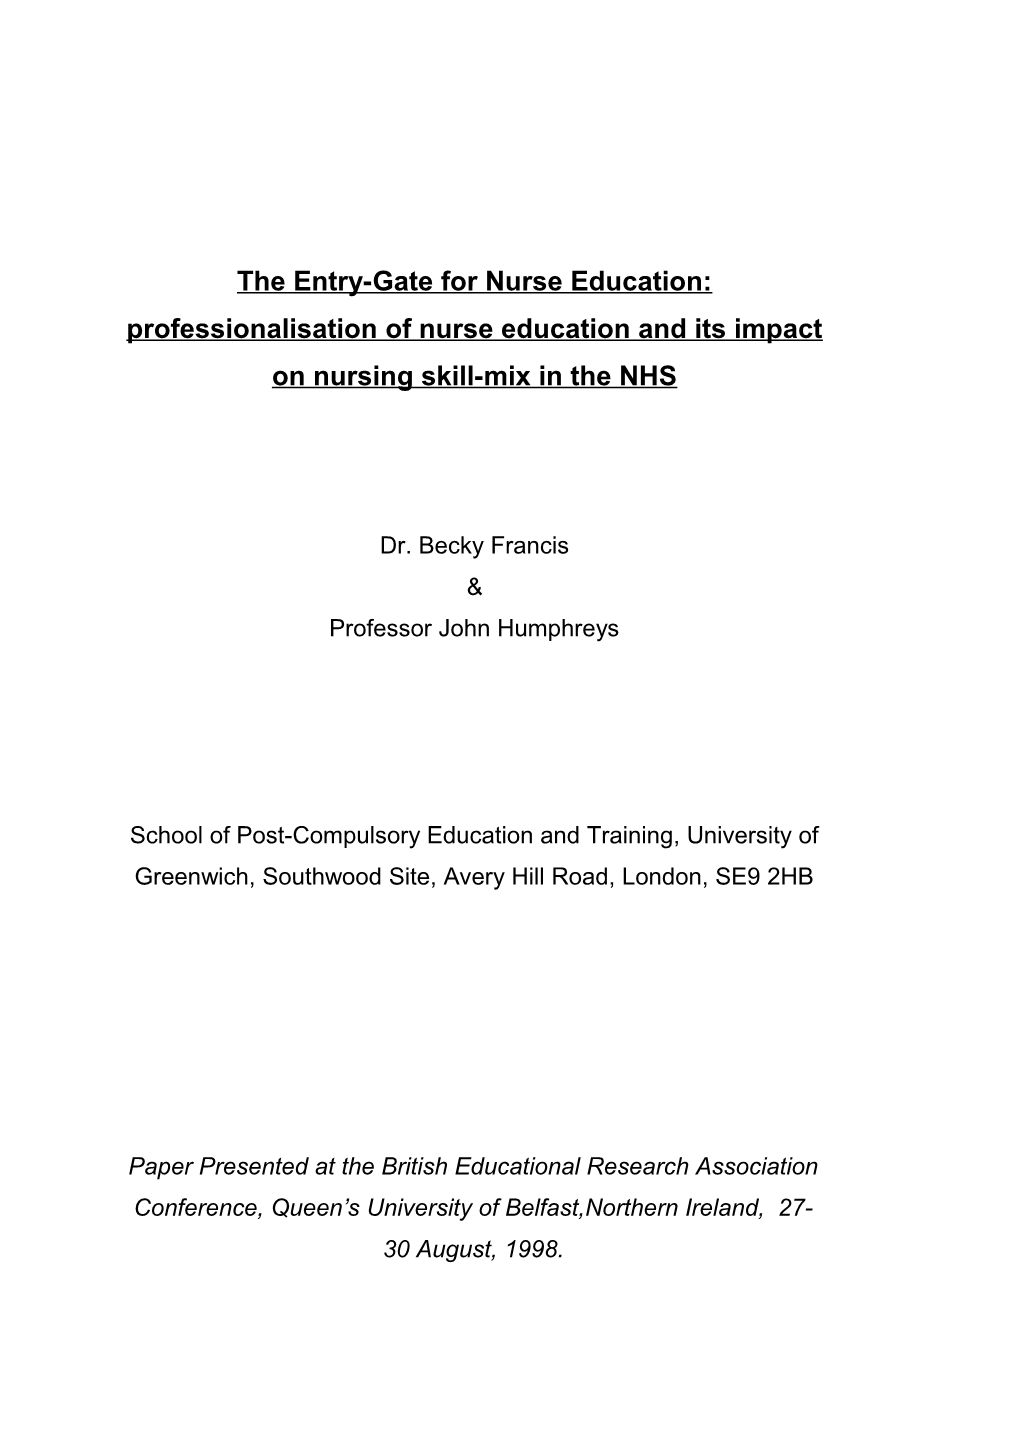 The Entry-Gate for Nurse Education: Professionalisation of Nurse Education and Its Impact